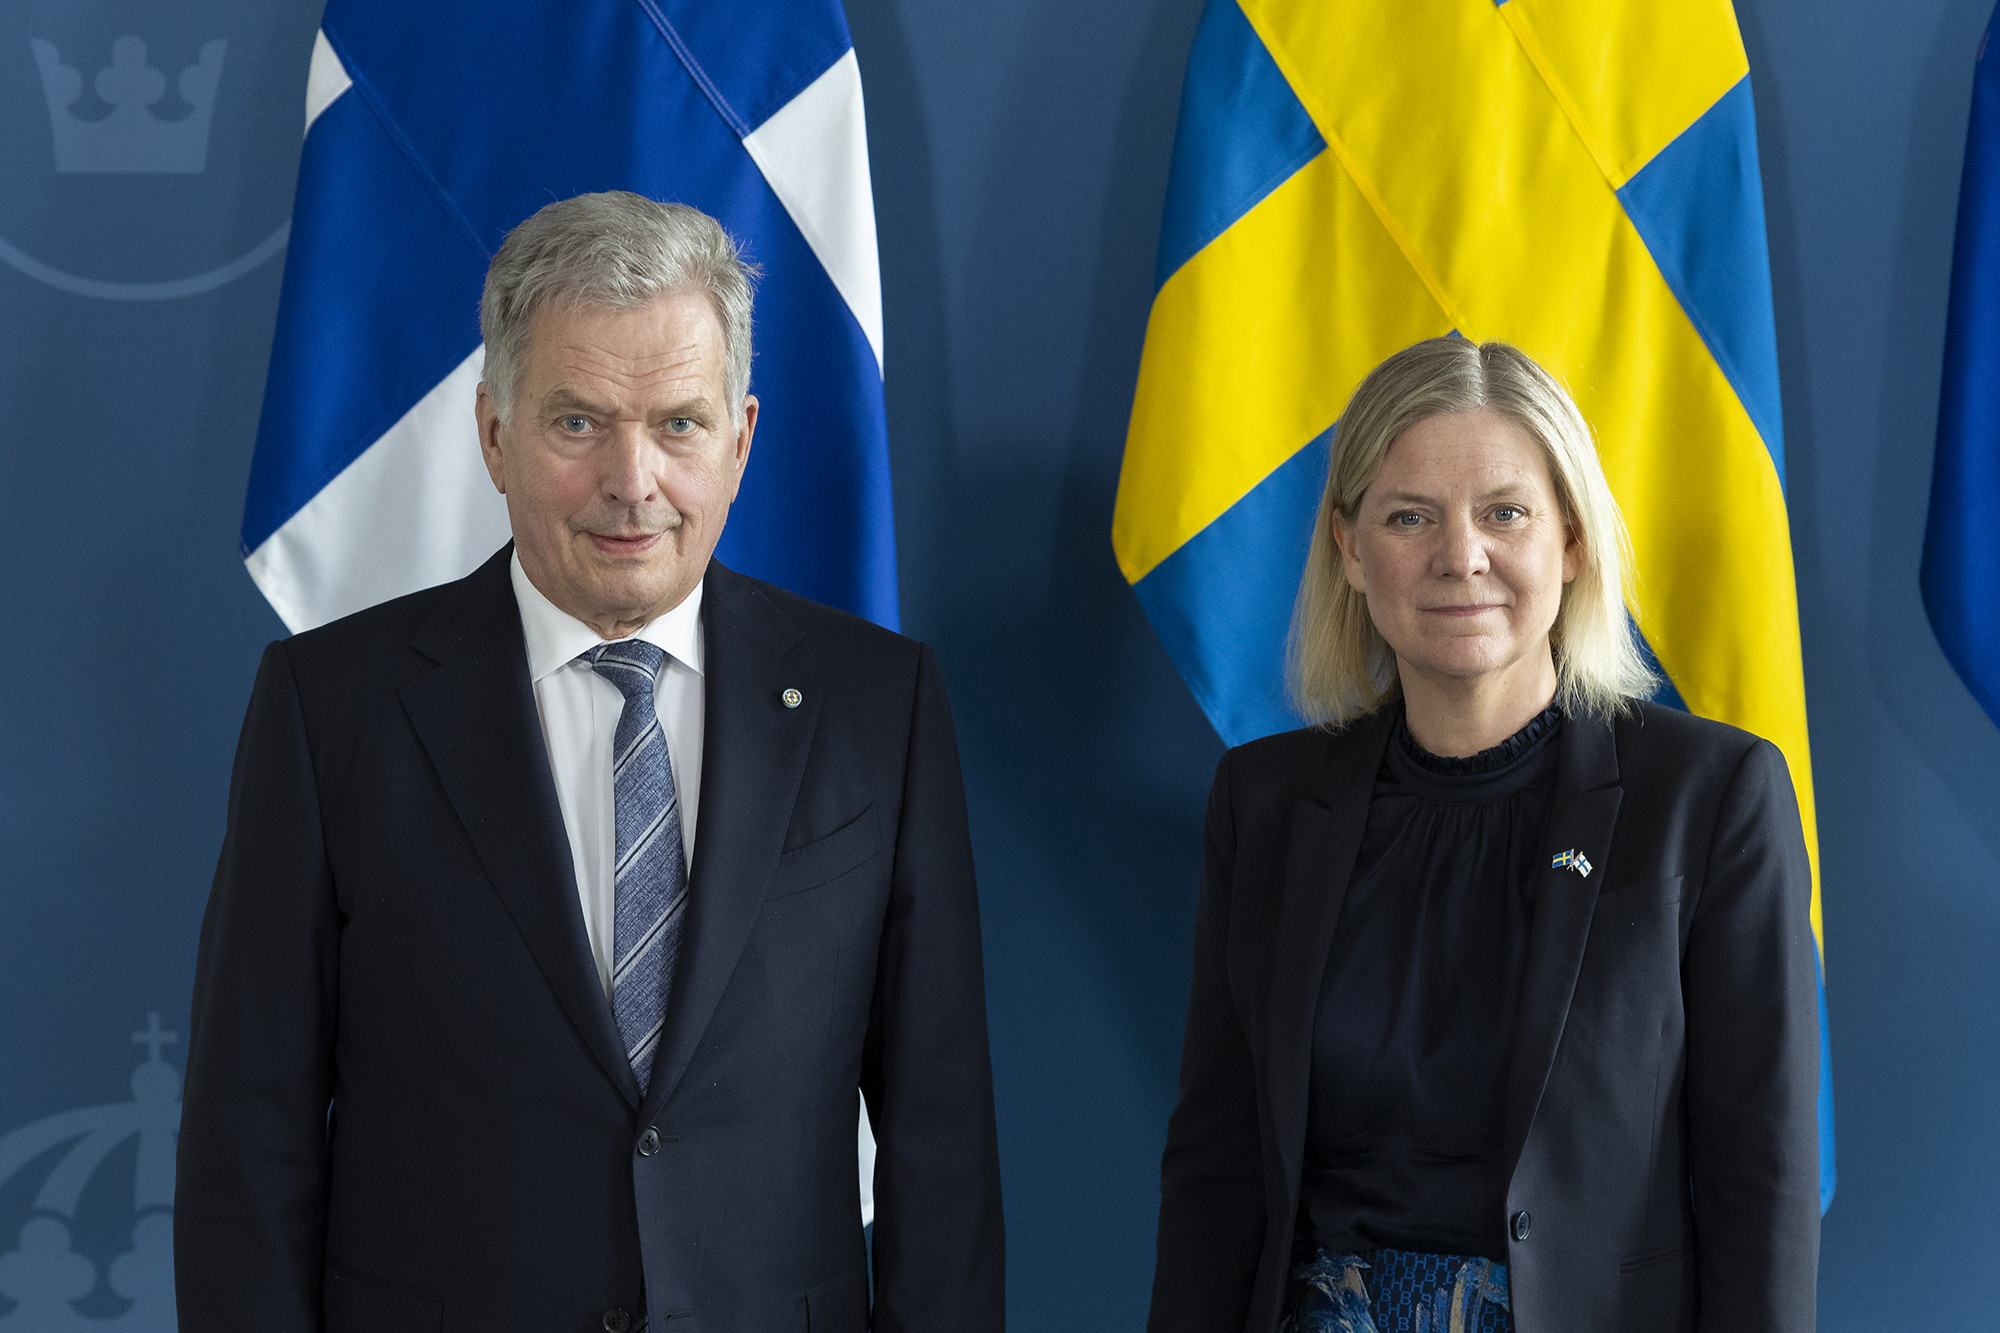 Finland's President Sauli Niinisto, left, poses with Swedish Prime Minister Magdalena Andersson at the Adelcrantz Palace on May 17, in Stockholm, Sweden